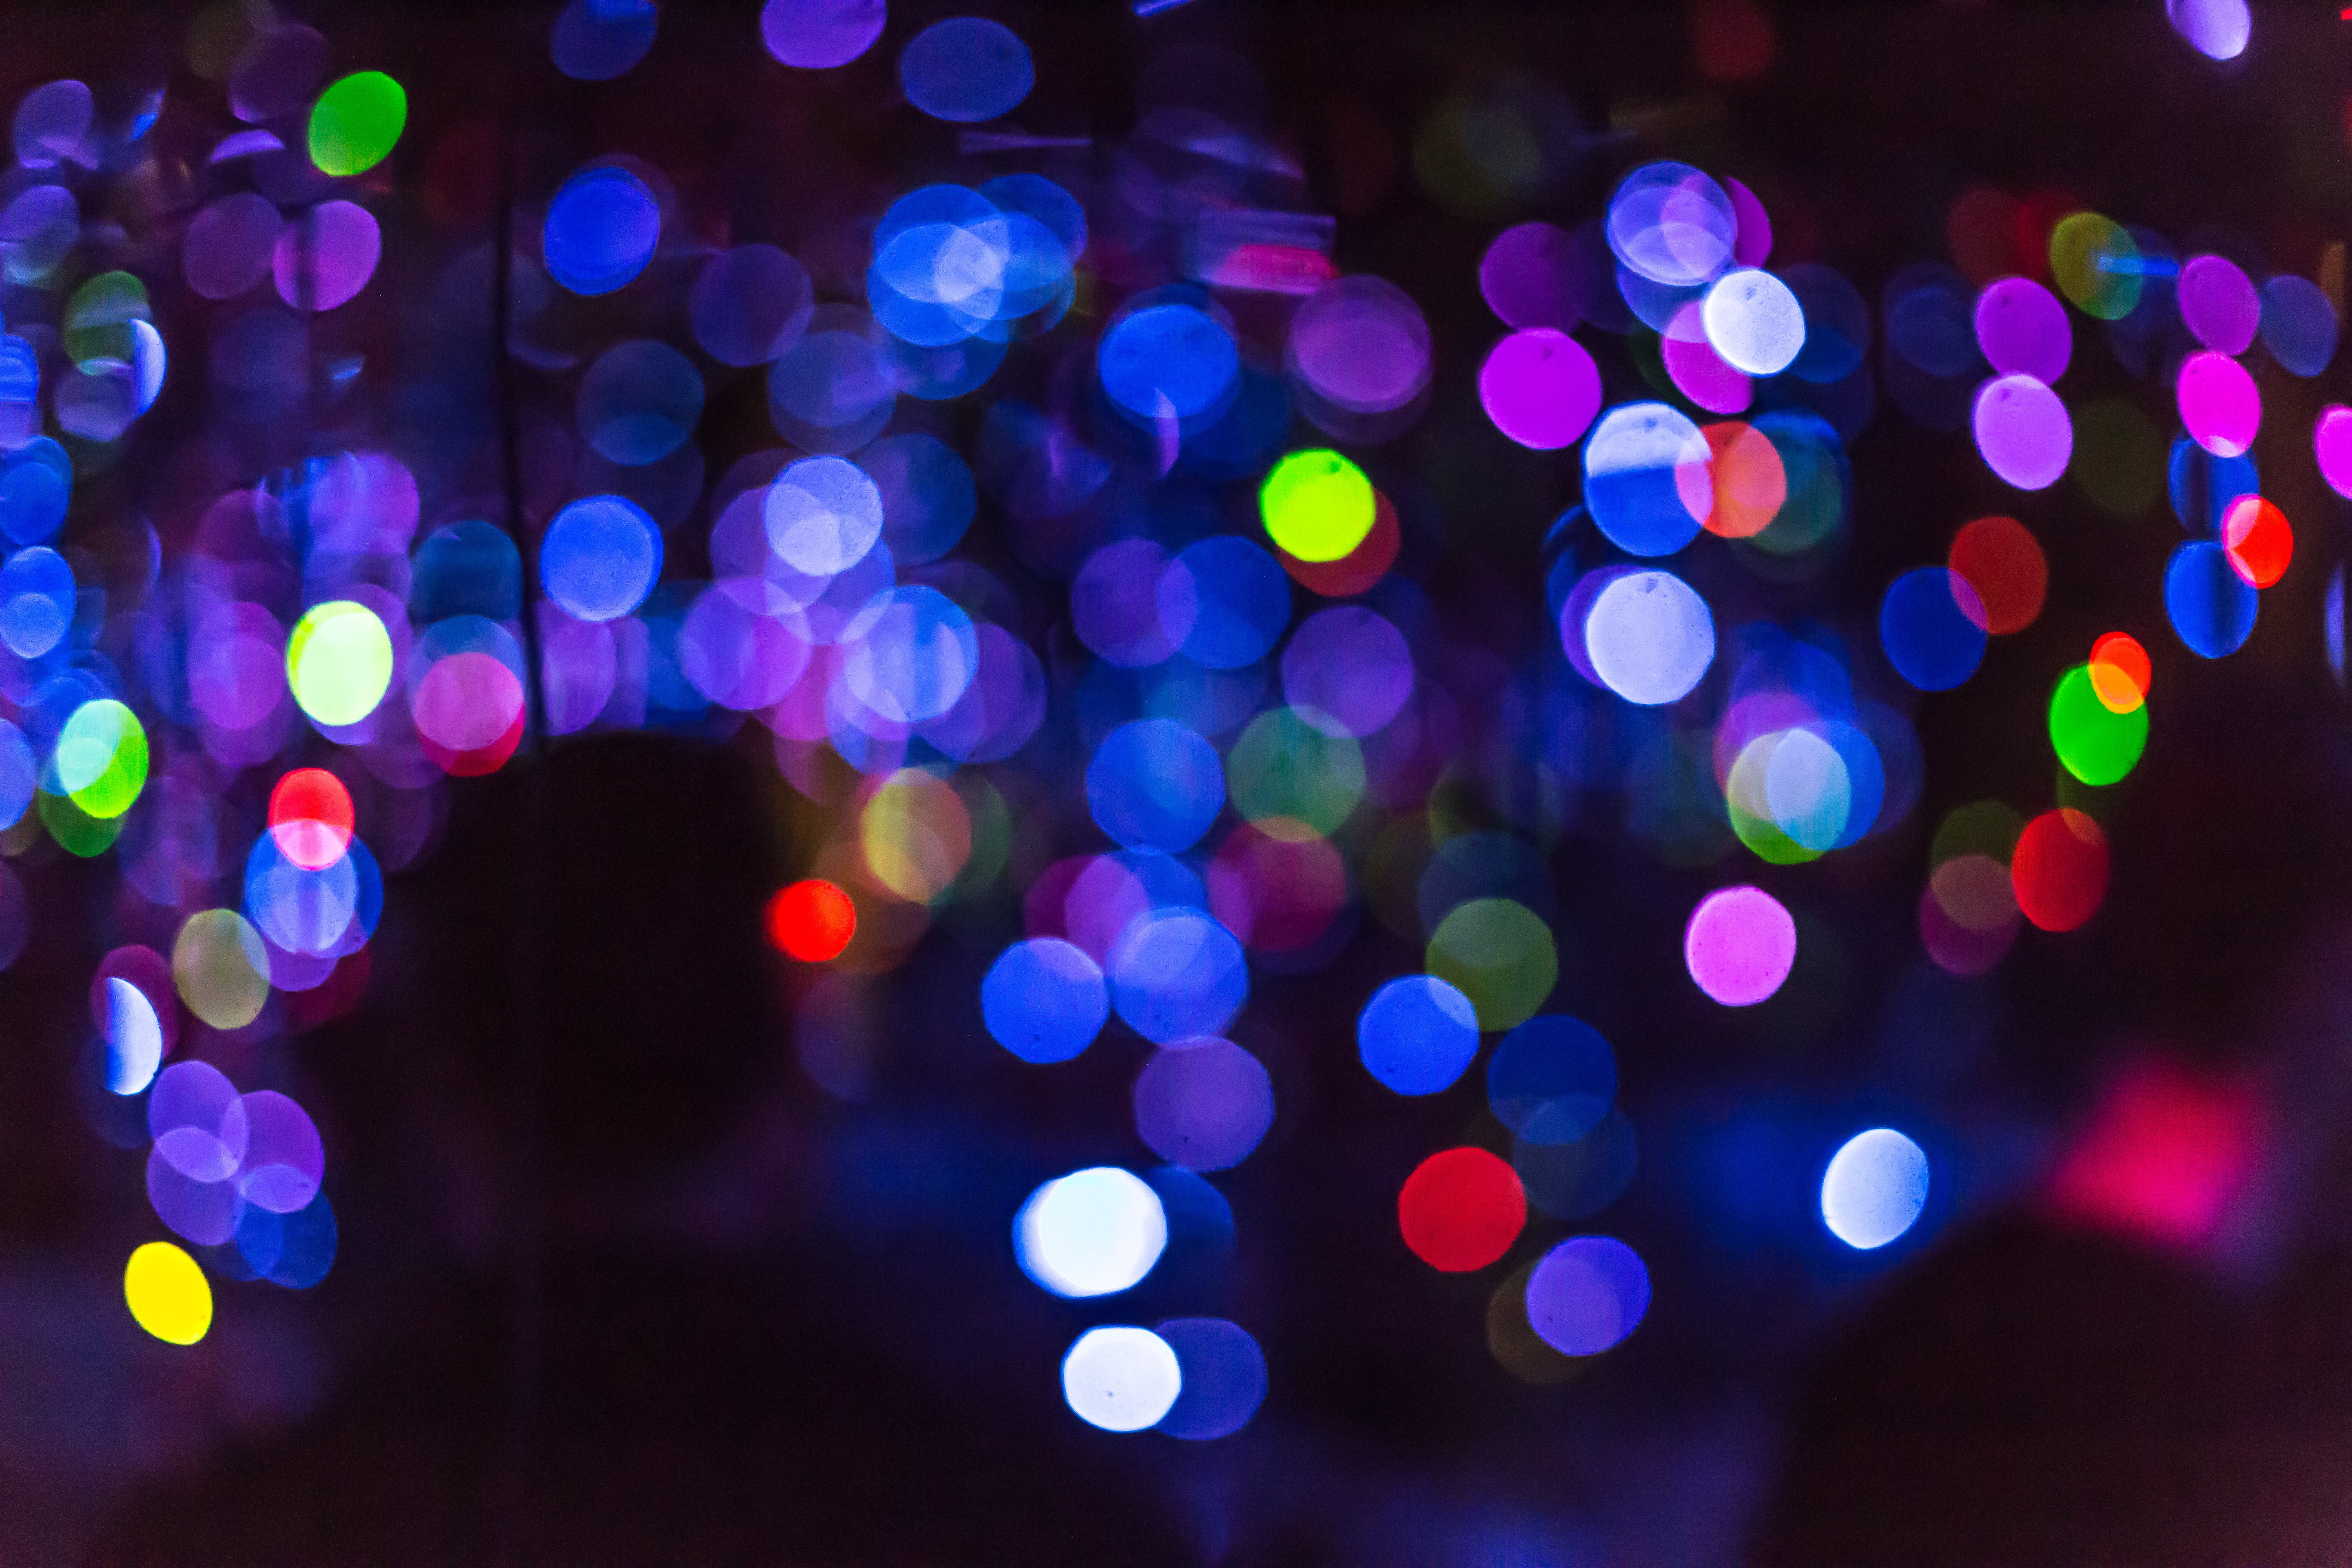 glare, light, circles, colorful, defocused, abstract, backgrounds